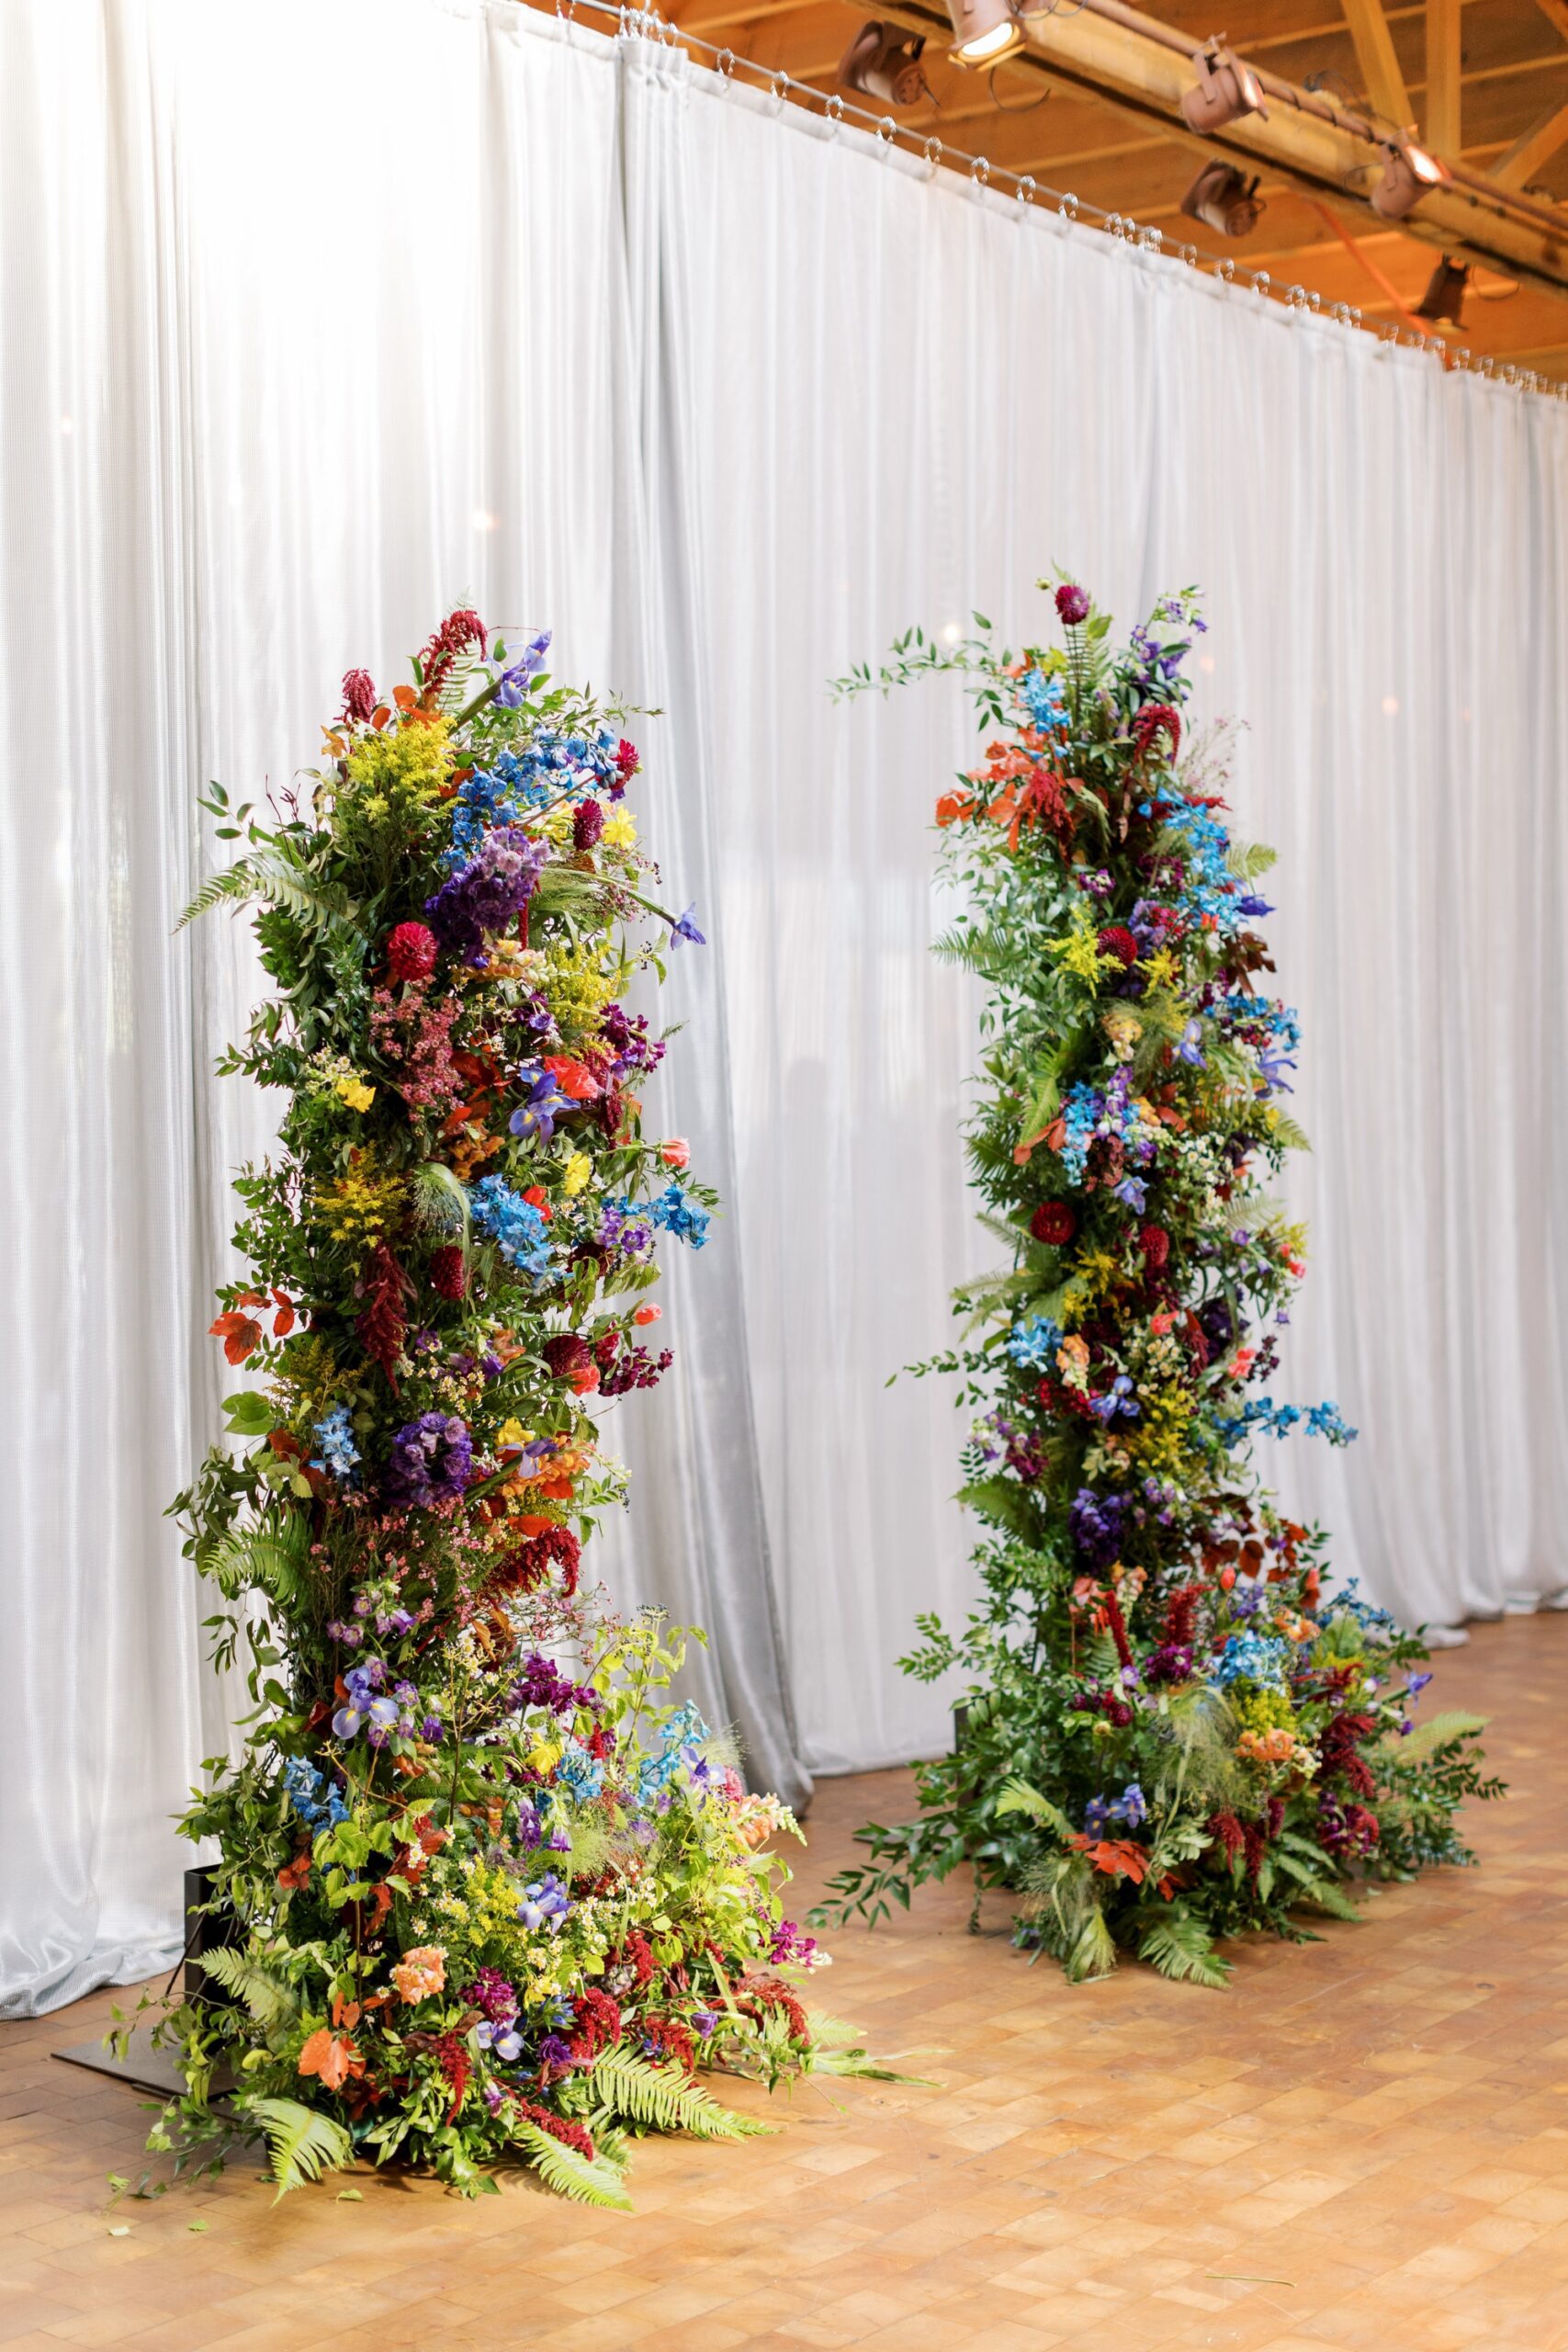 The colorful wedding ceremony arch fit the colorful wedding palette